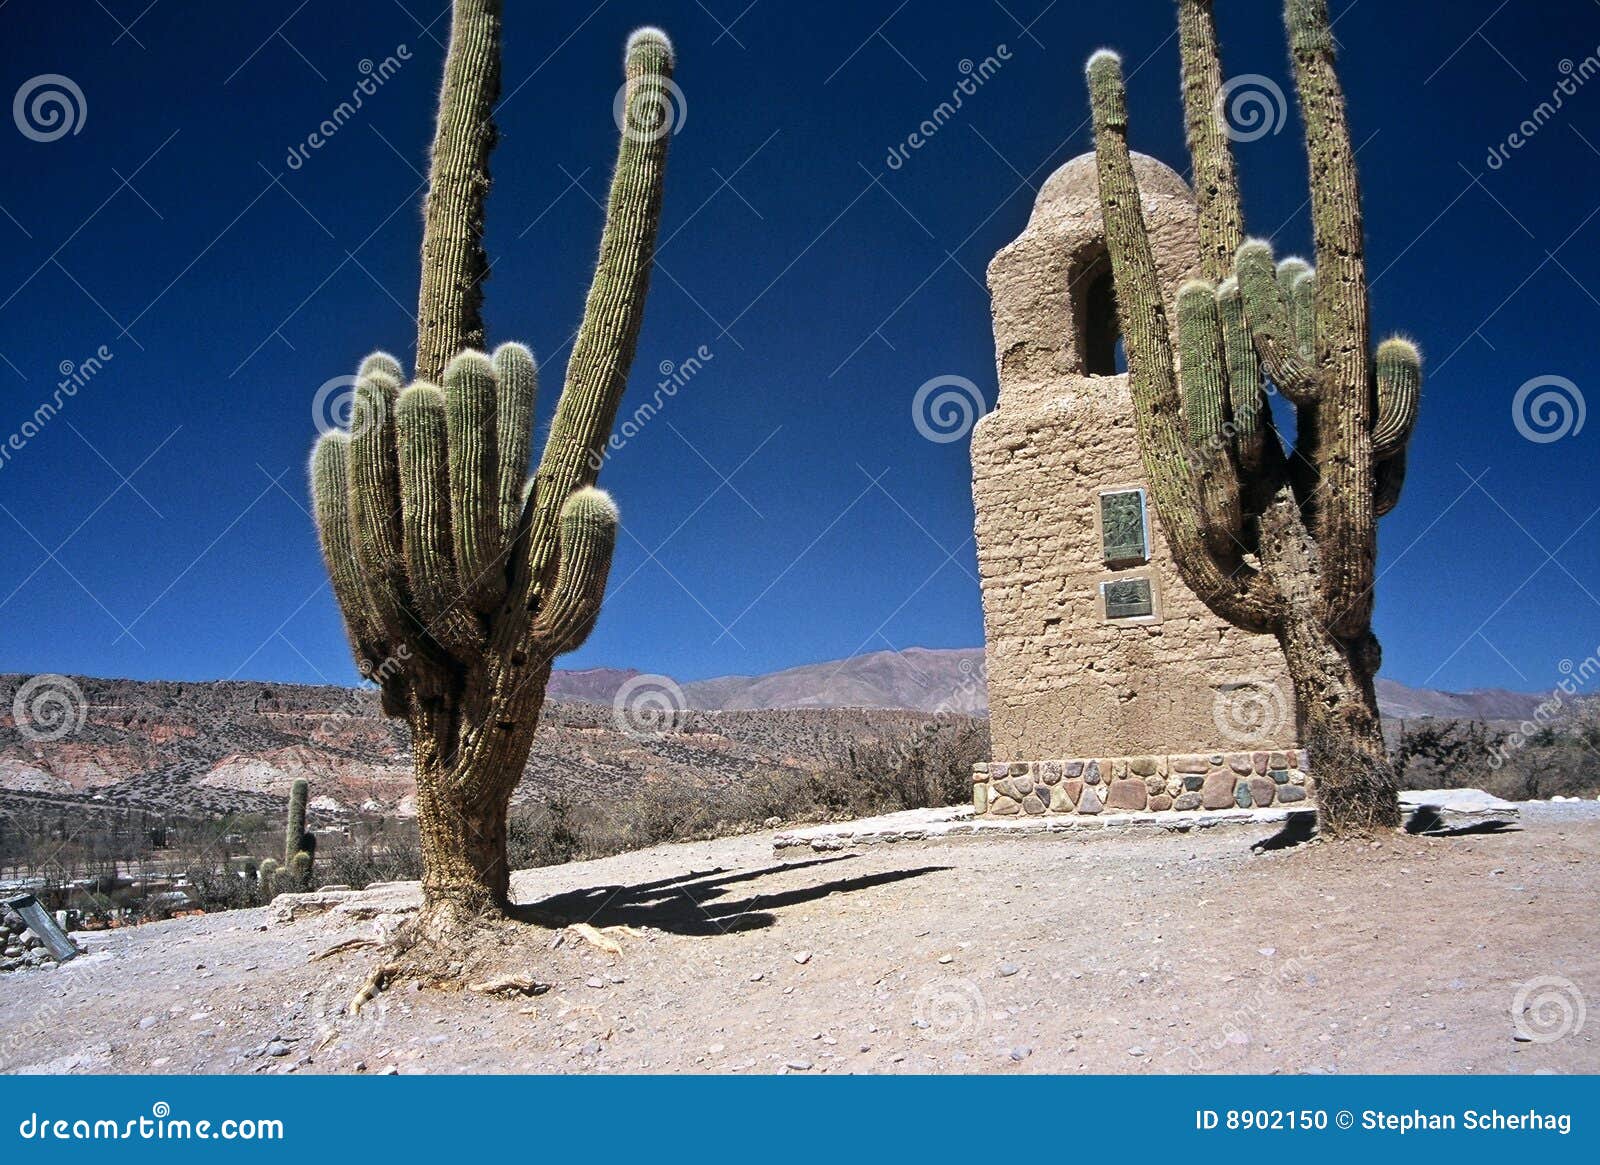 two huge cactuses in humahuaca ,salta,argentina